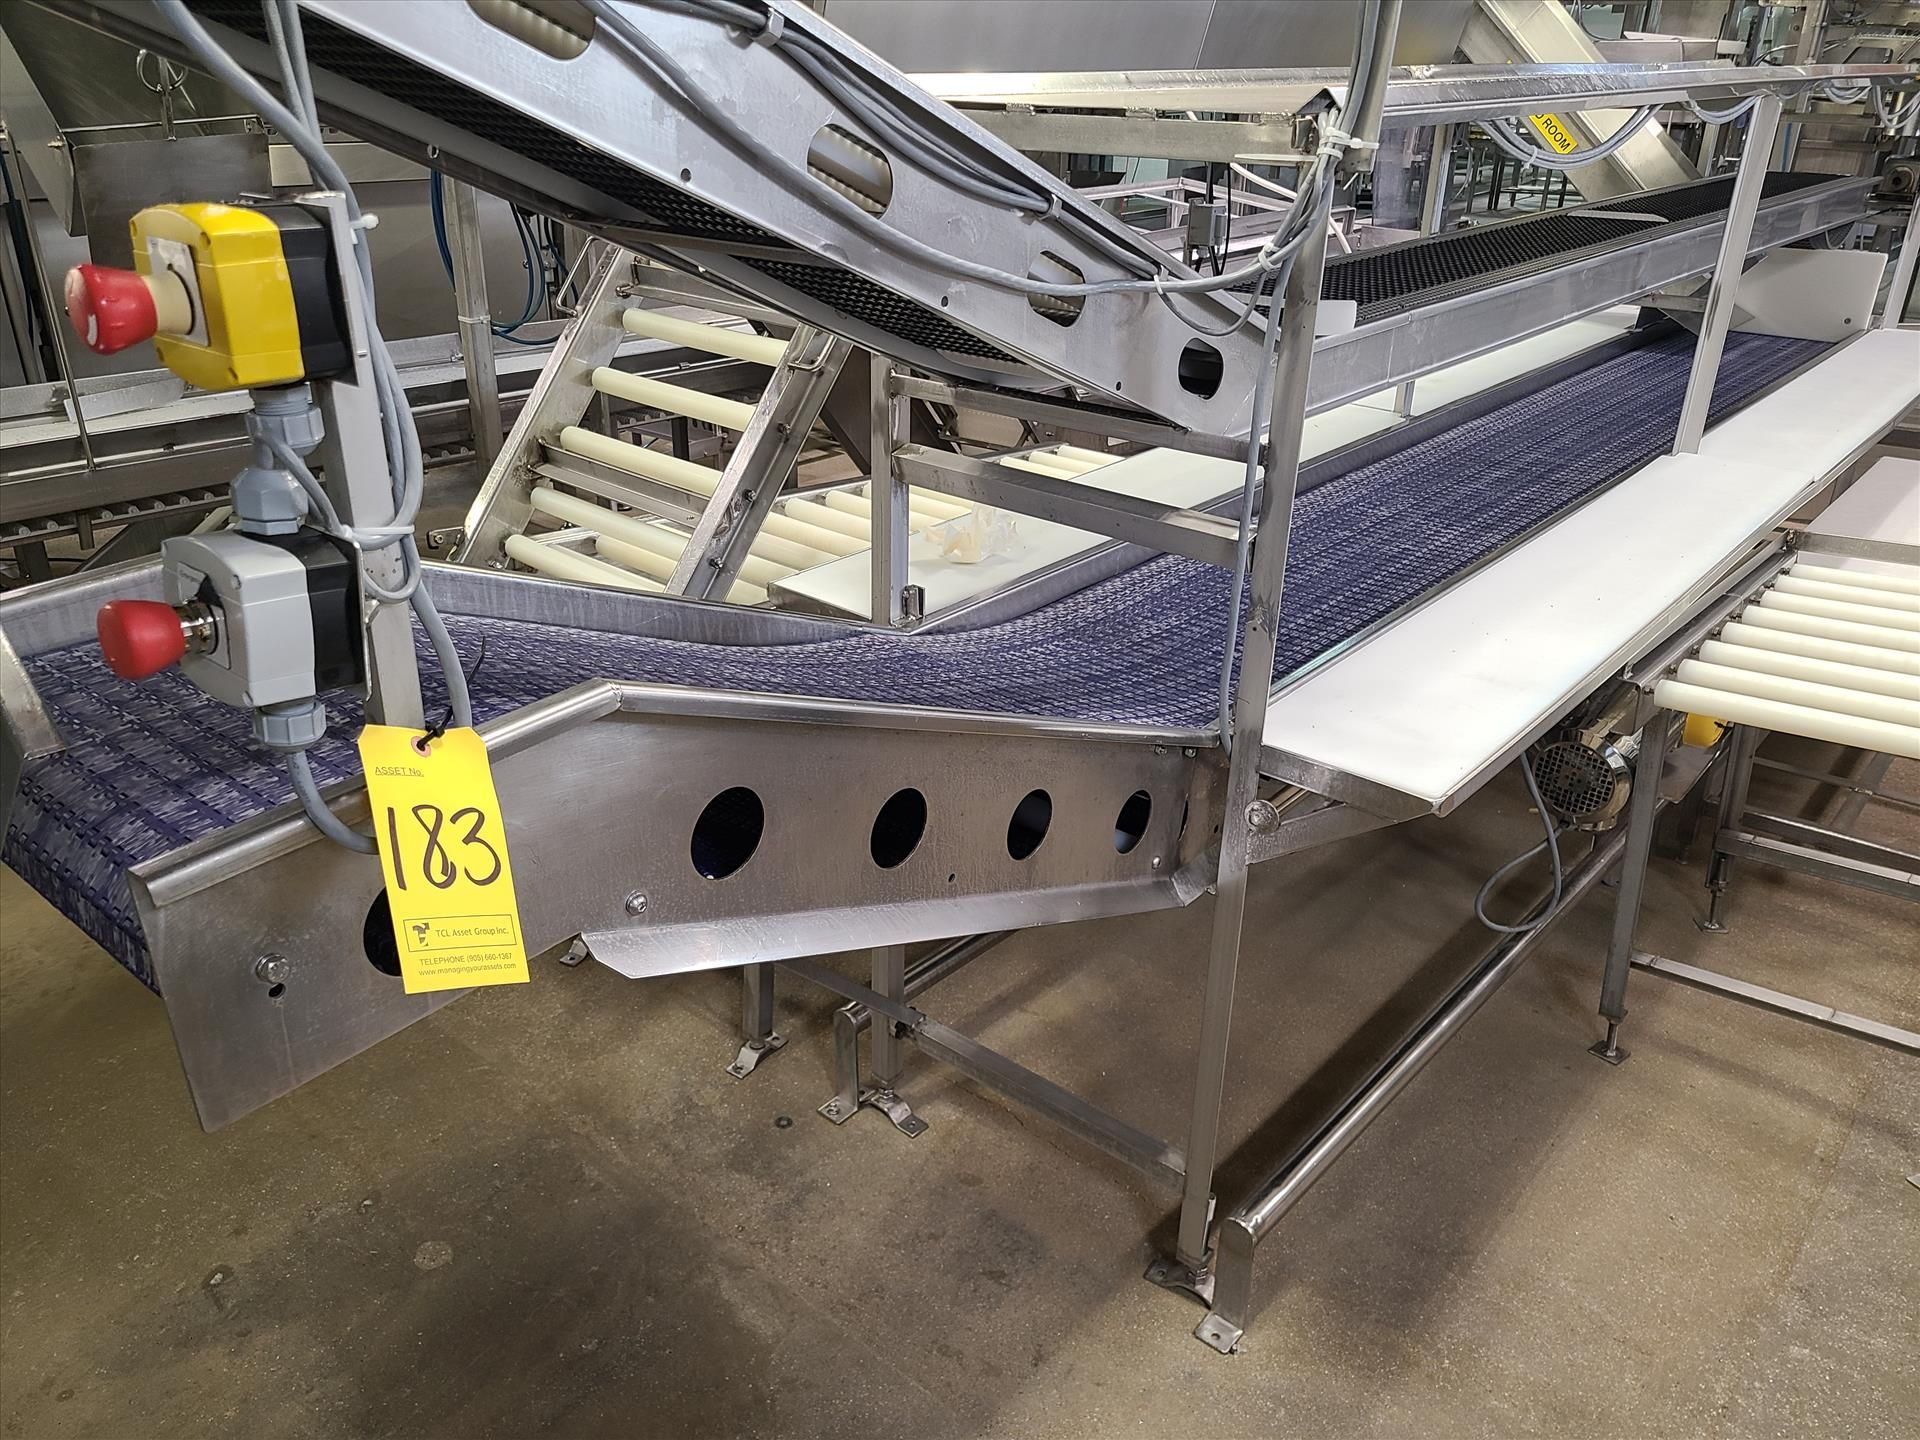 belt conveyor, approx. 18 in. x 15 ft., 2 hp wash-down motor, casters, stainless steel [Loc. Cut-